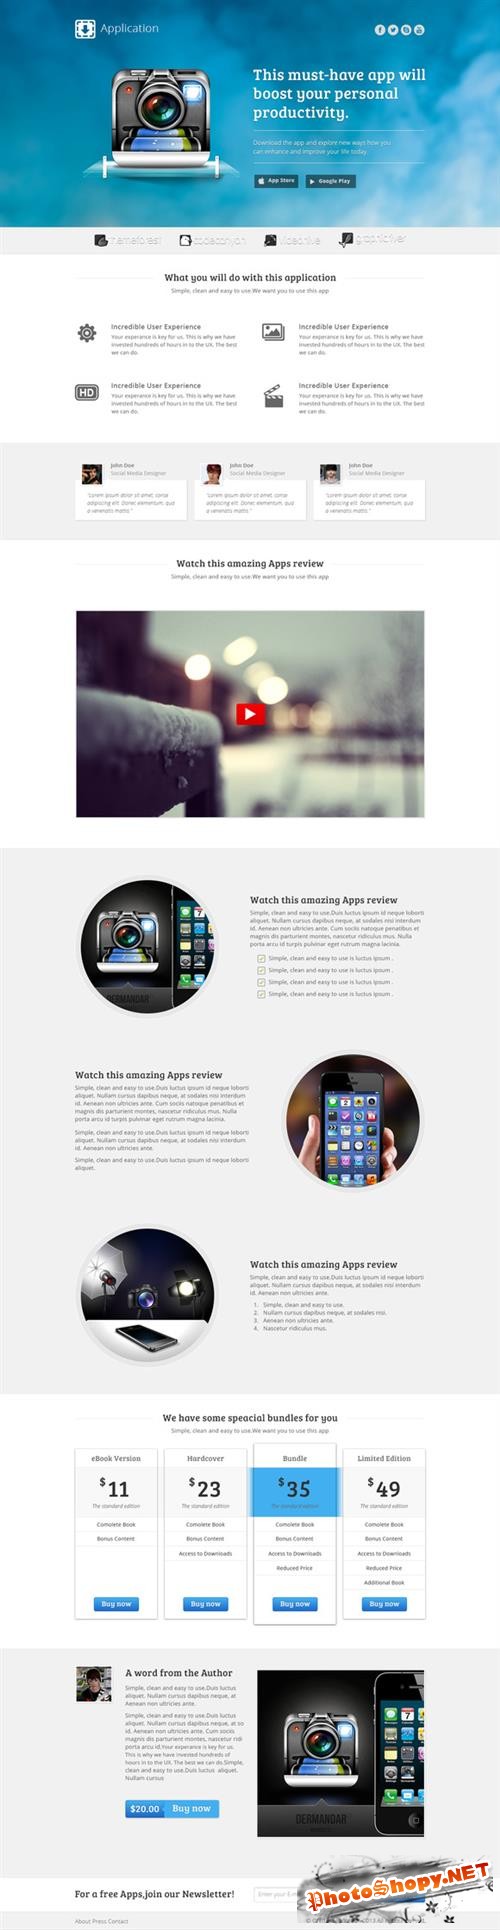 CreativeMarket - Application - Landing page for apps